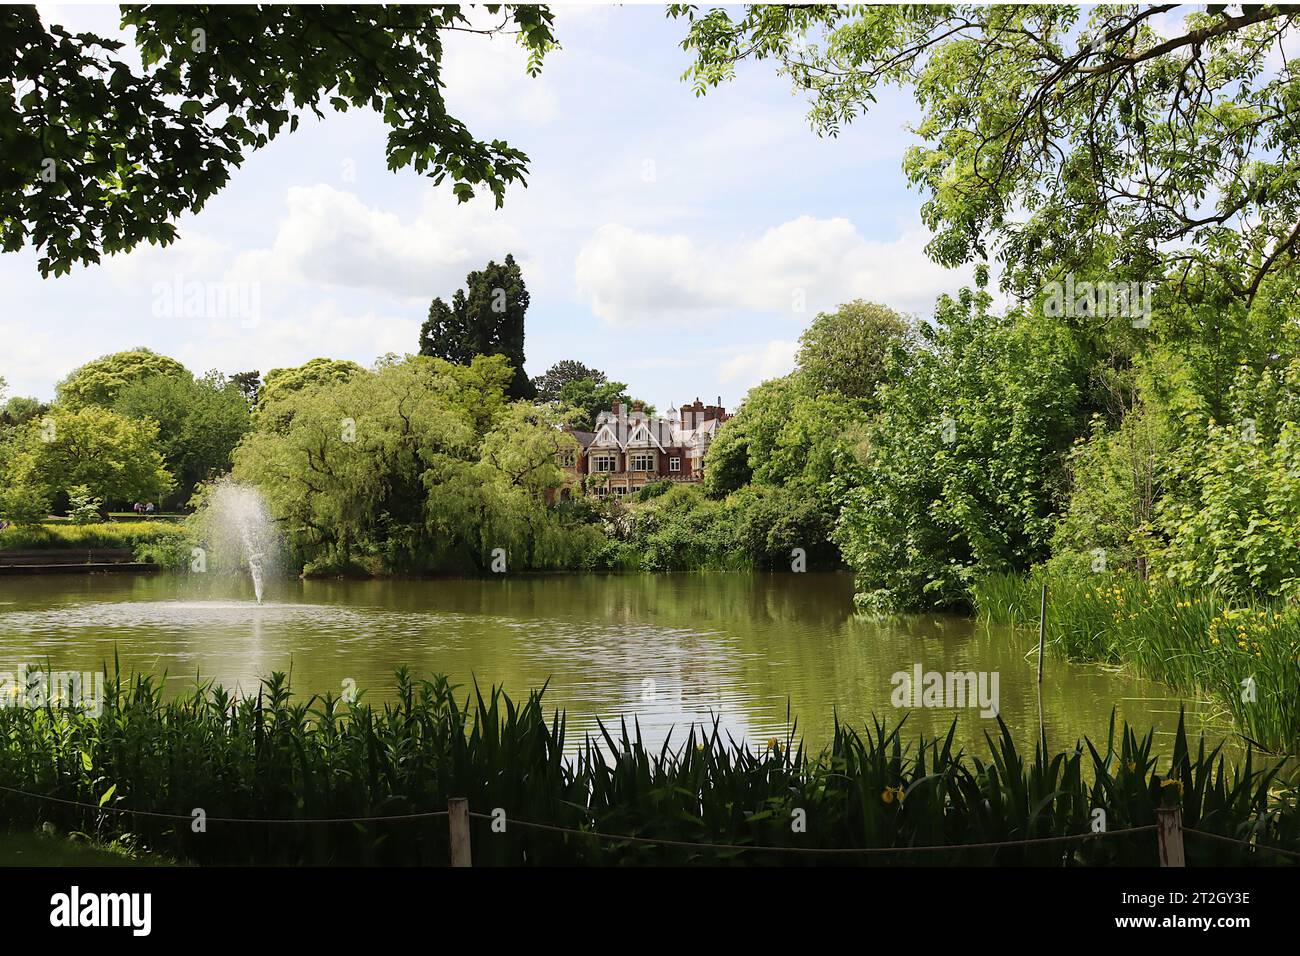 The view of Bletchley Park mansion viewed from the lakeside. In the 1990s it was revealed to have been an undercover WWII code breaking centre. Stock Photo